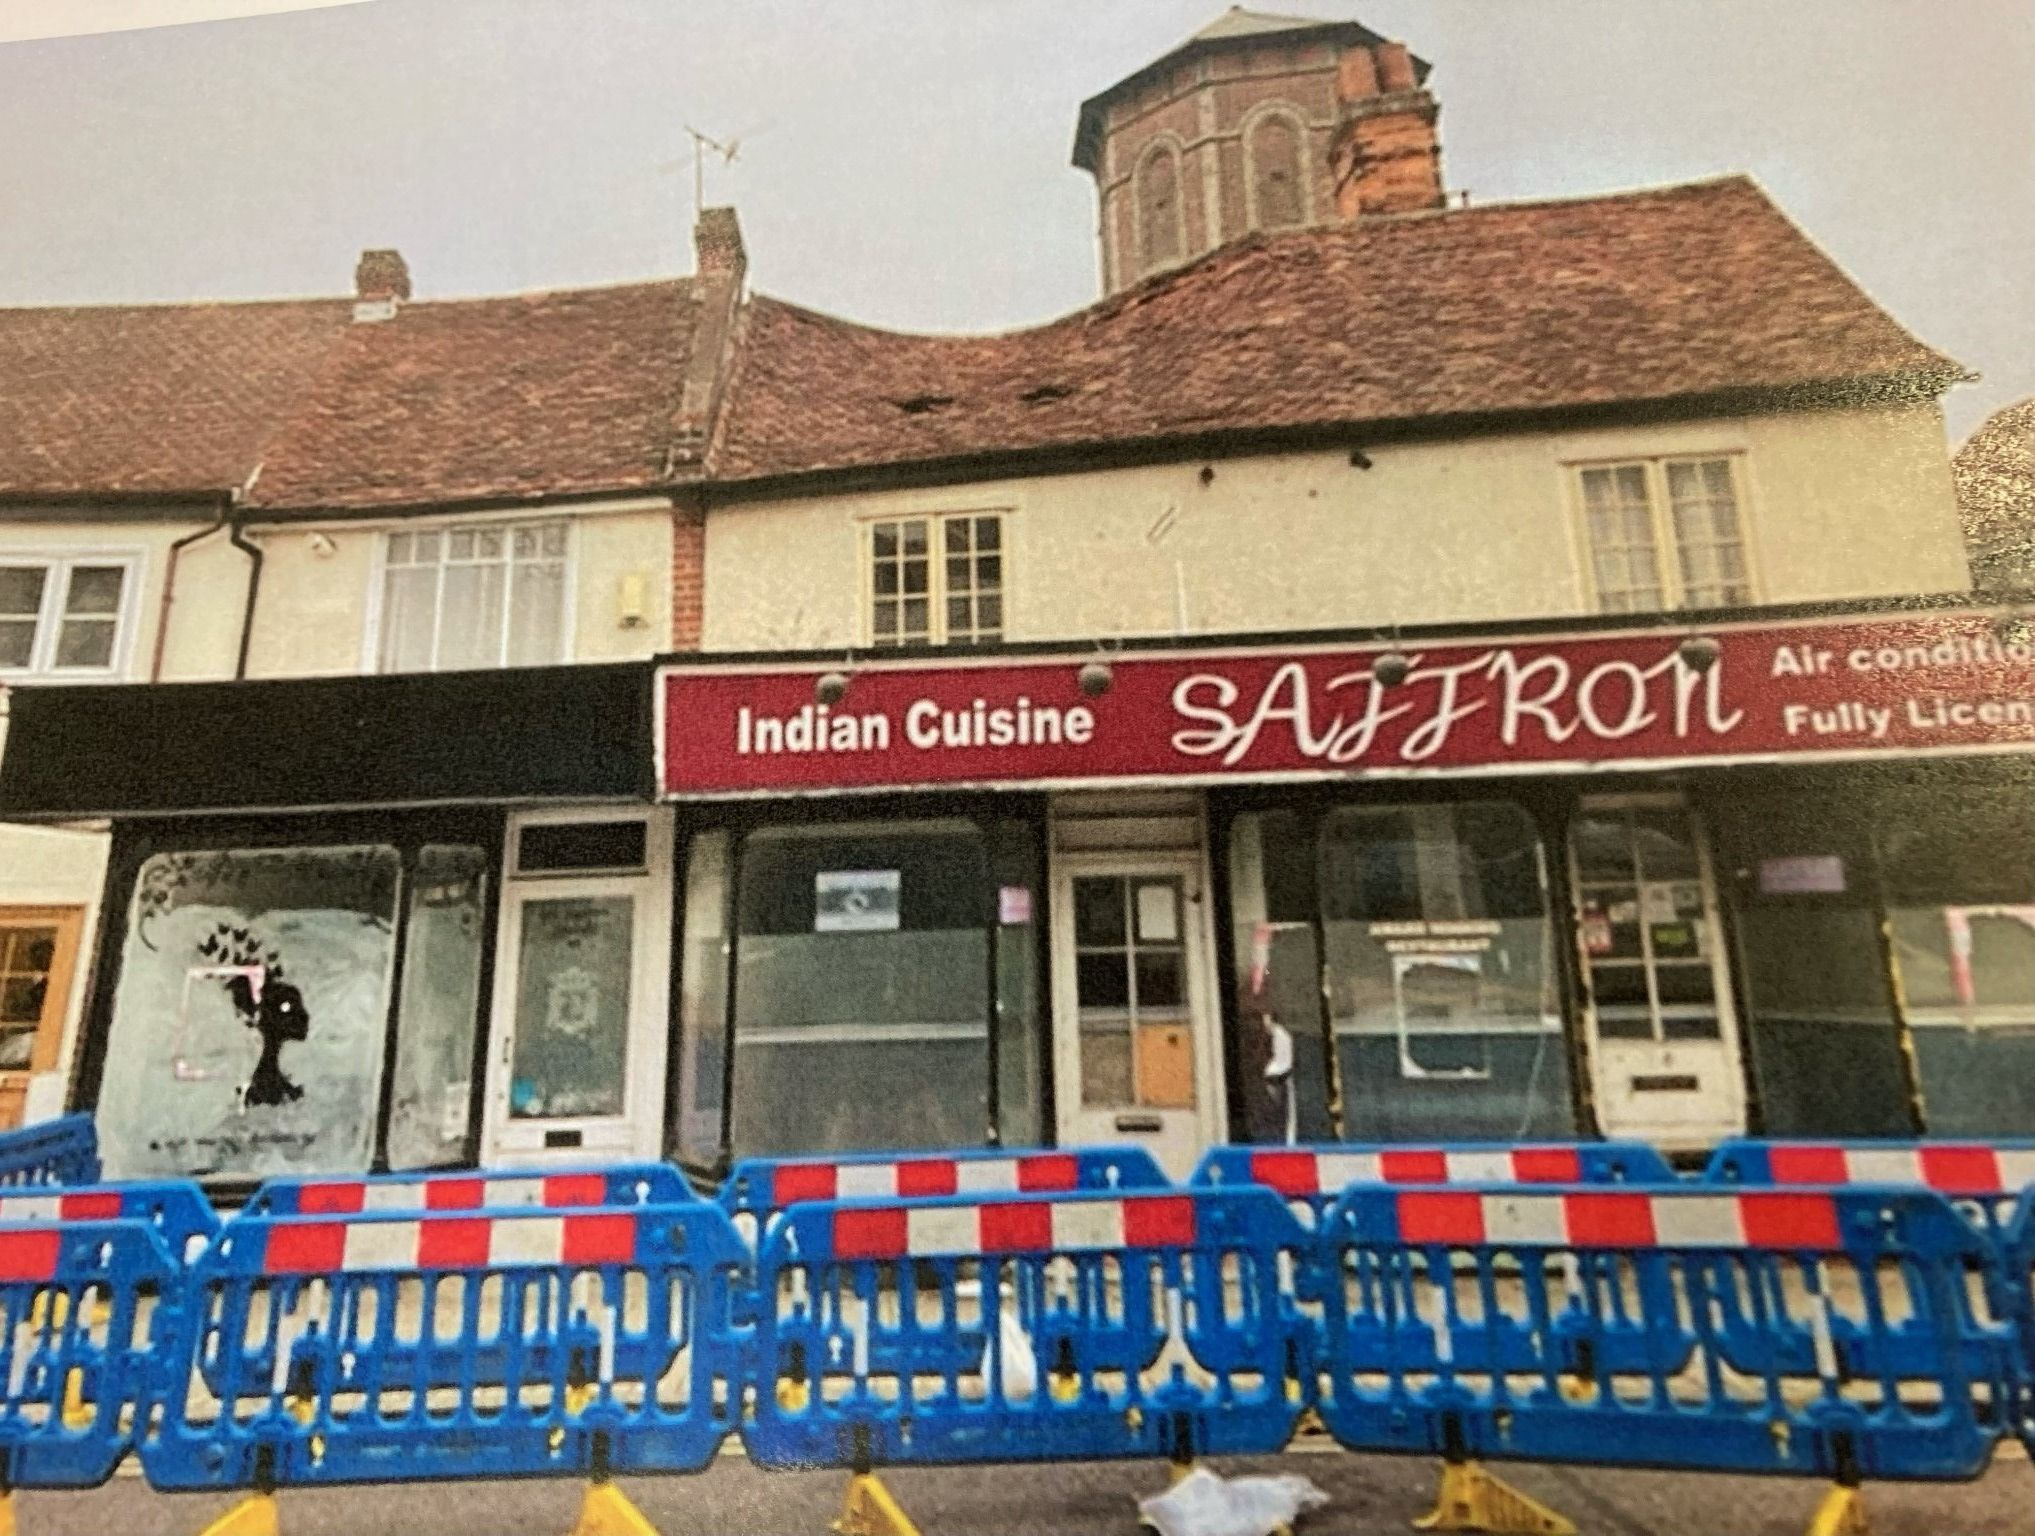 Old Saffron Indian Cuisine building on Coggeshall Road, Braintree - Image